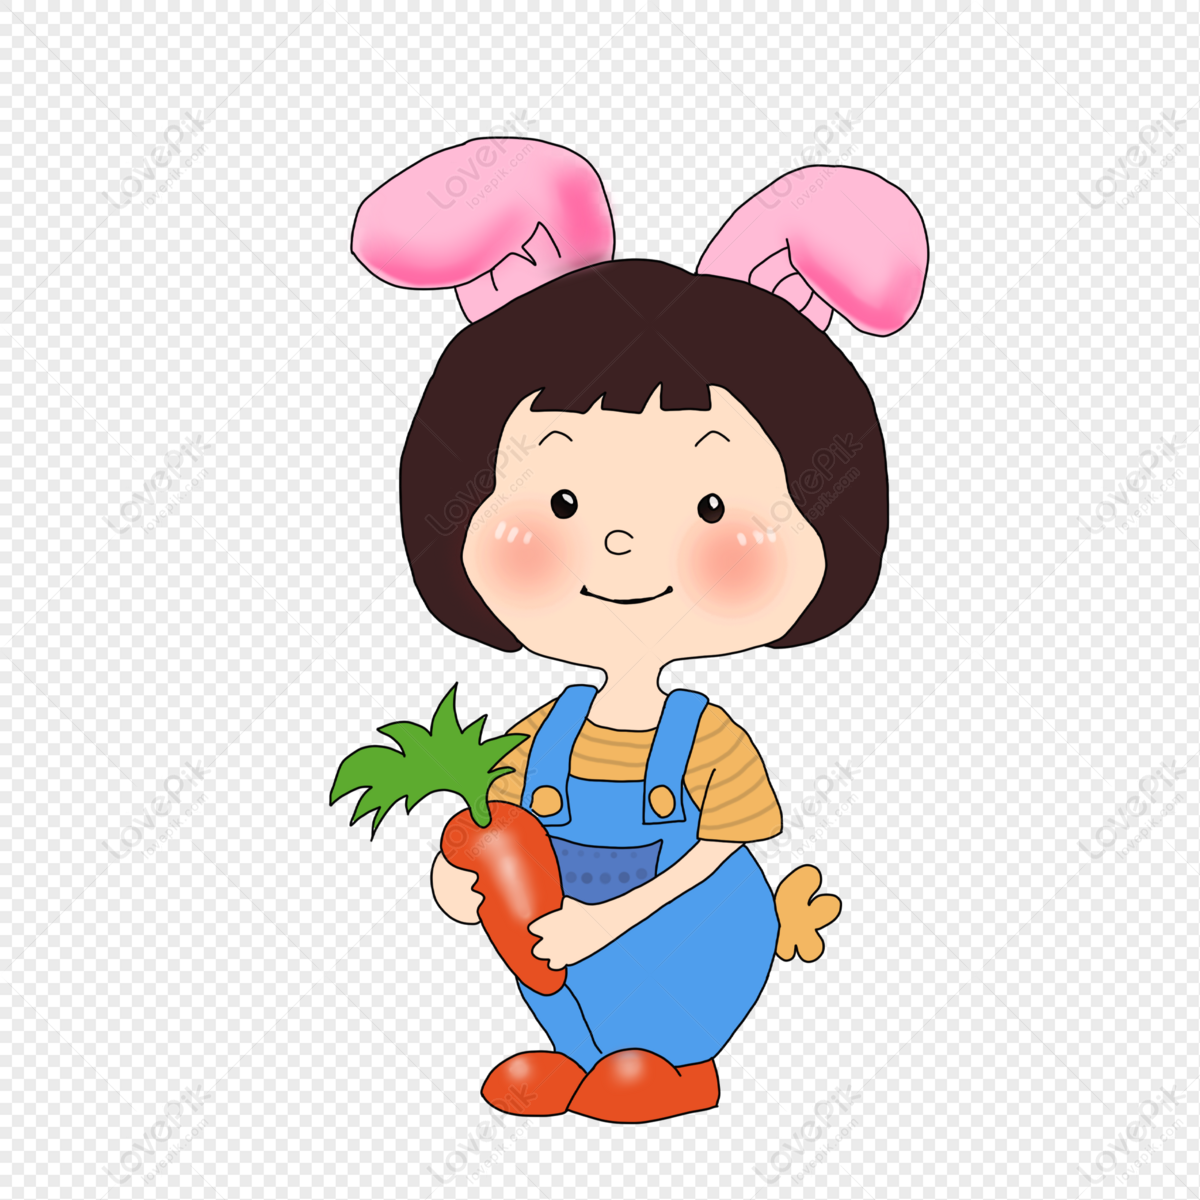 Girl Plays The Bunny Free PNG And Clipart Image For Free Download - Lovepik  | 401384179